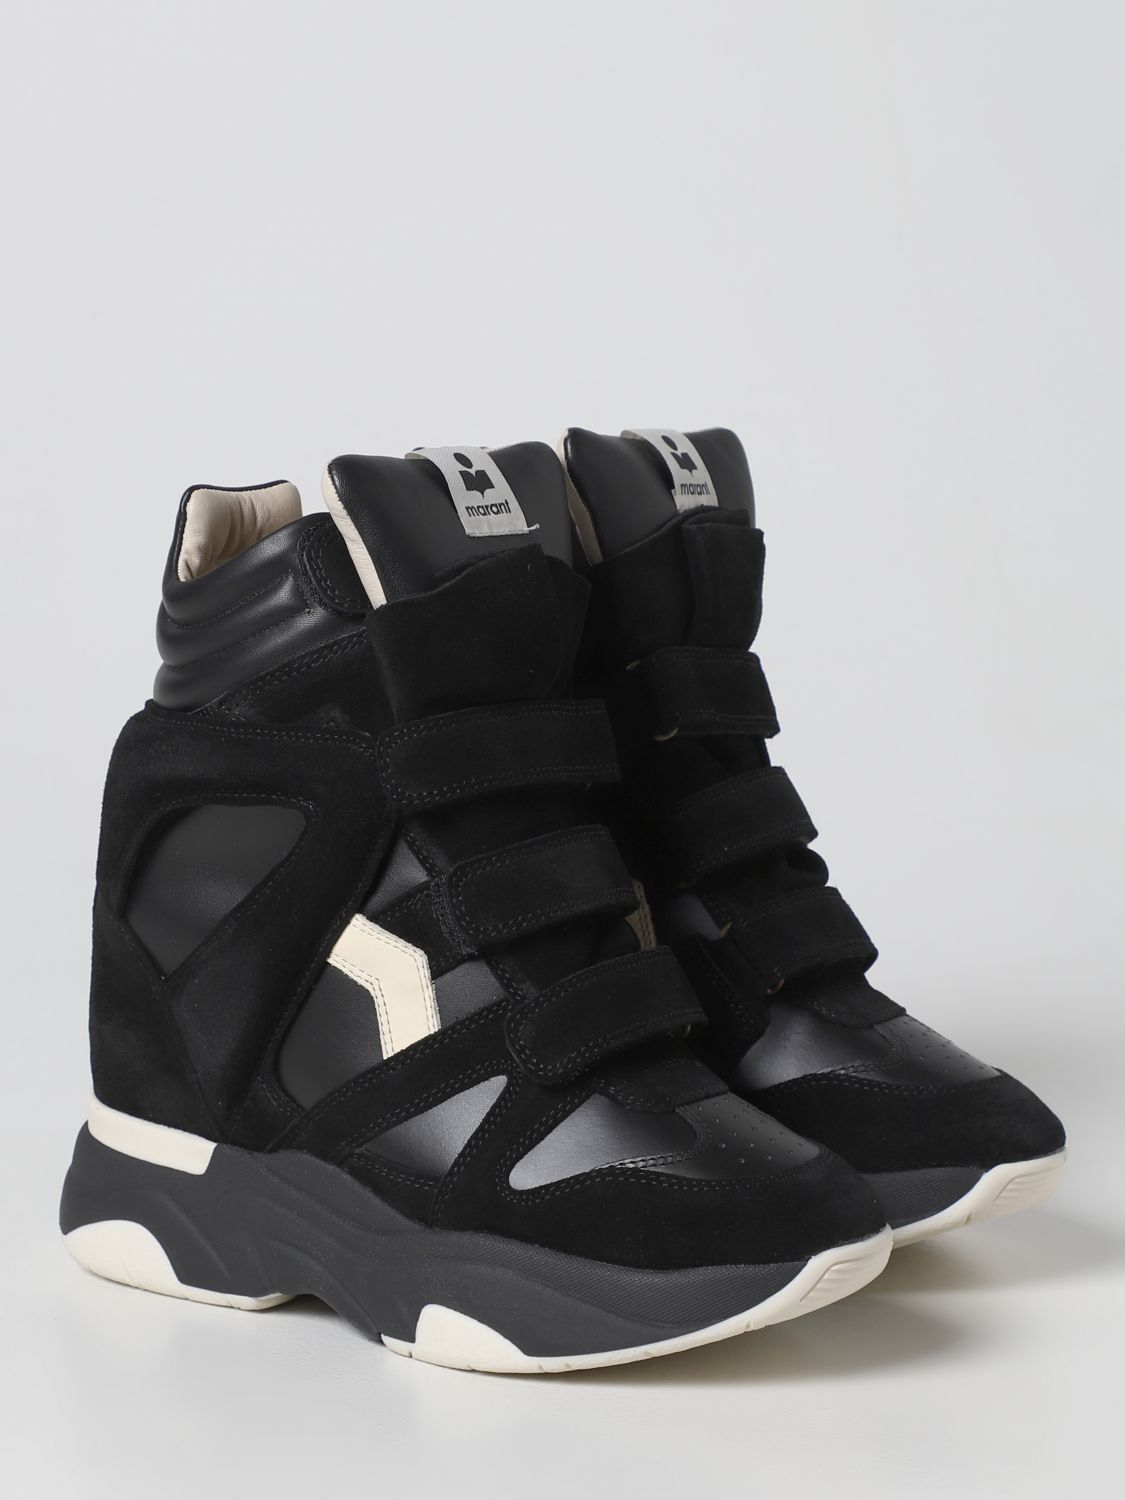 ISABEL MARANT: sneakers for woman Black | Isabel Marant sneakers BK0009FAA1E17S on GIGLIO.COM